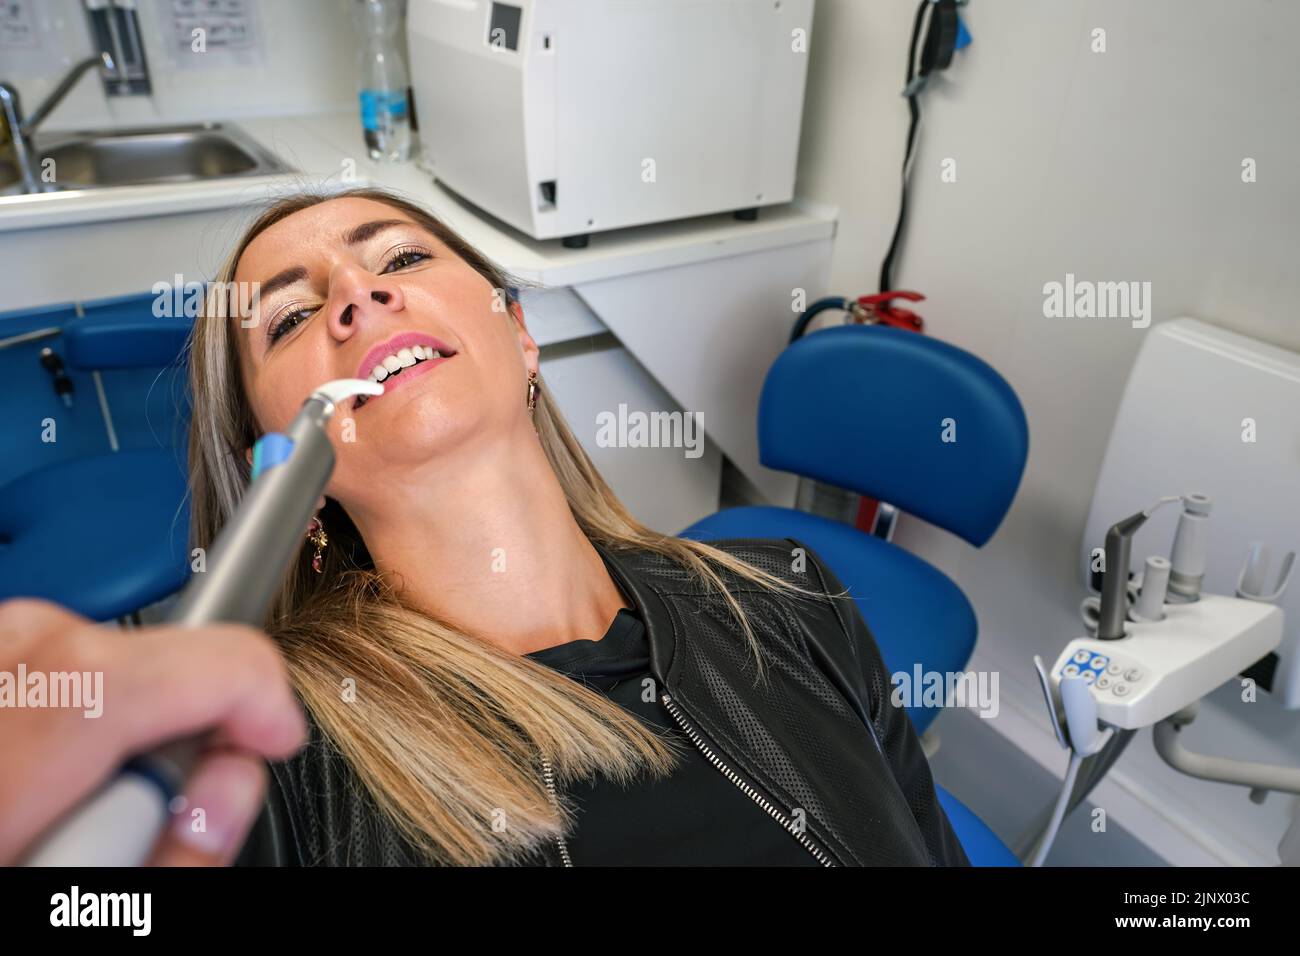 Young woman posing with her mouth half open at dentist chair, dental tool near her teeth, first person view Stock Photo